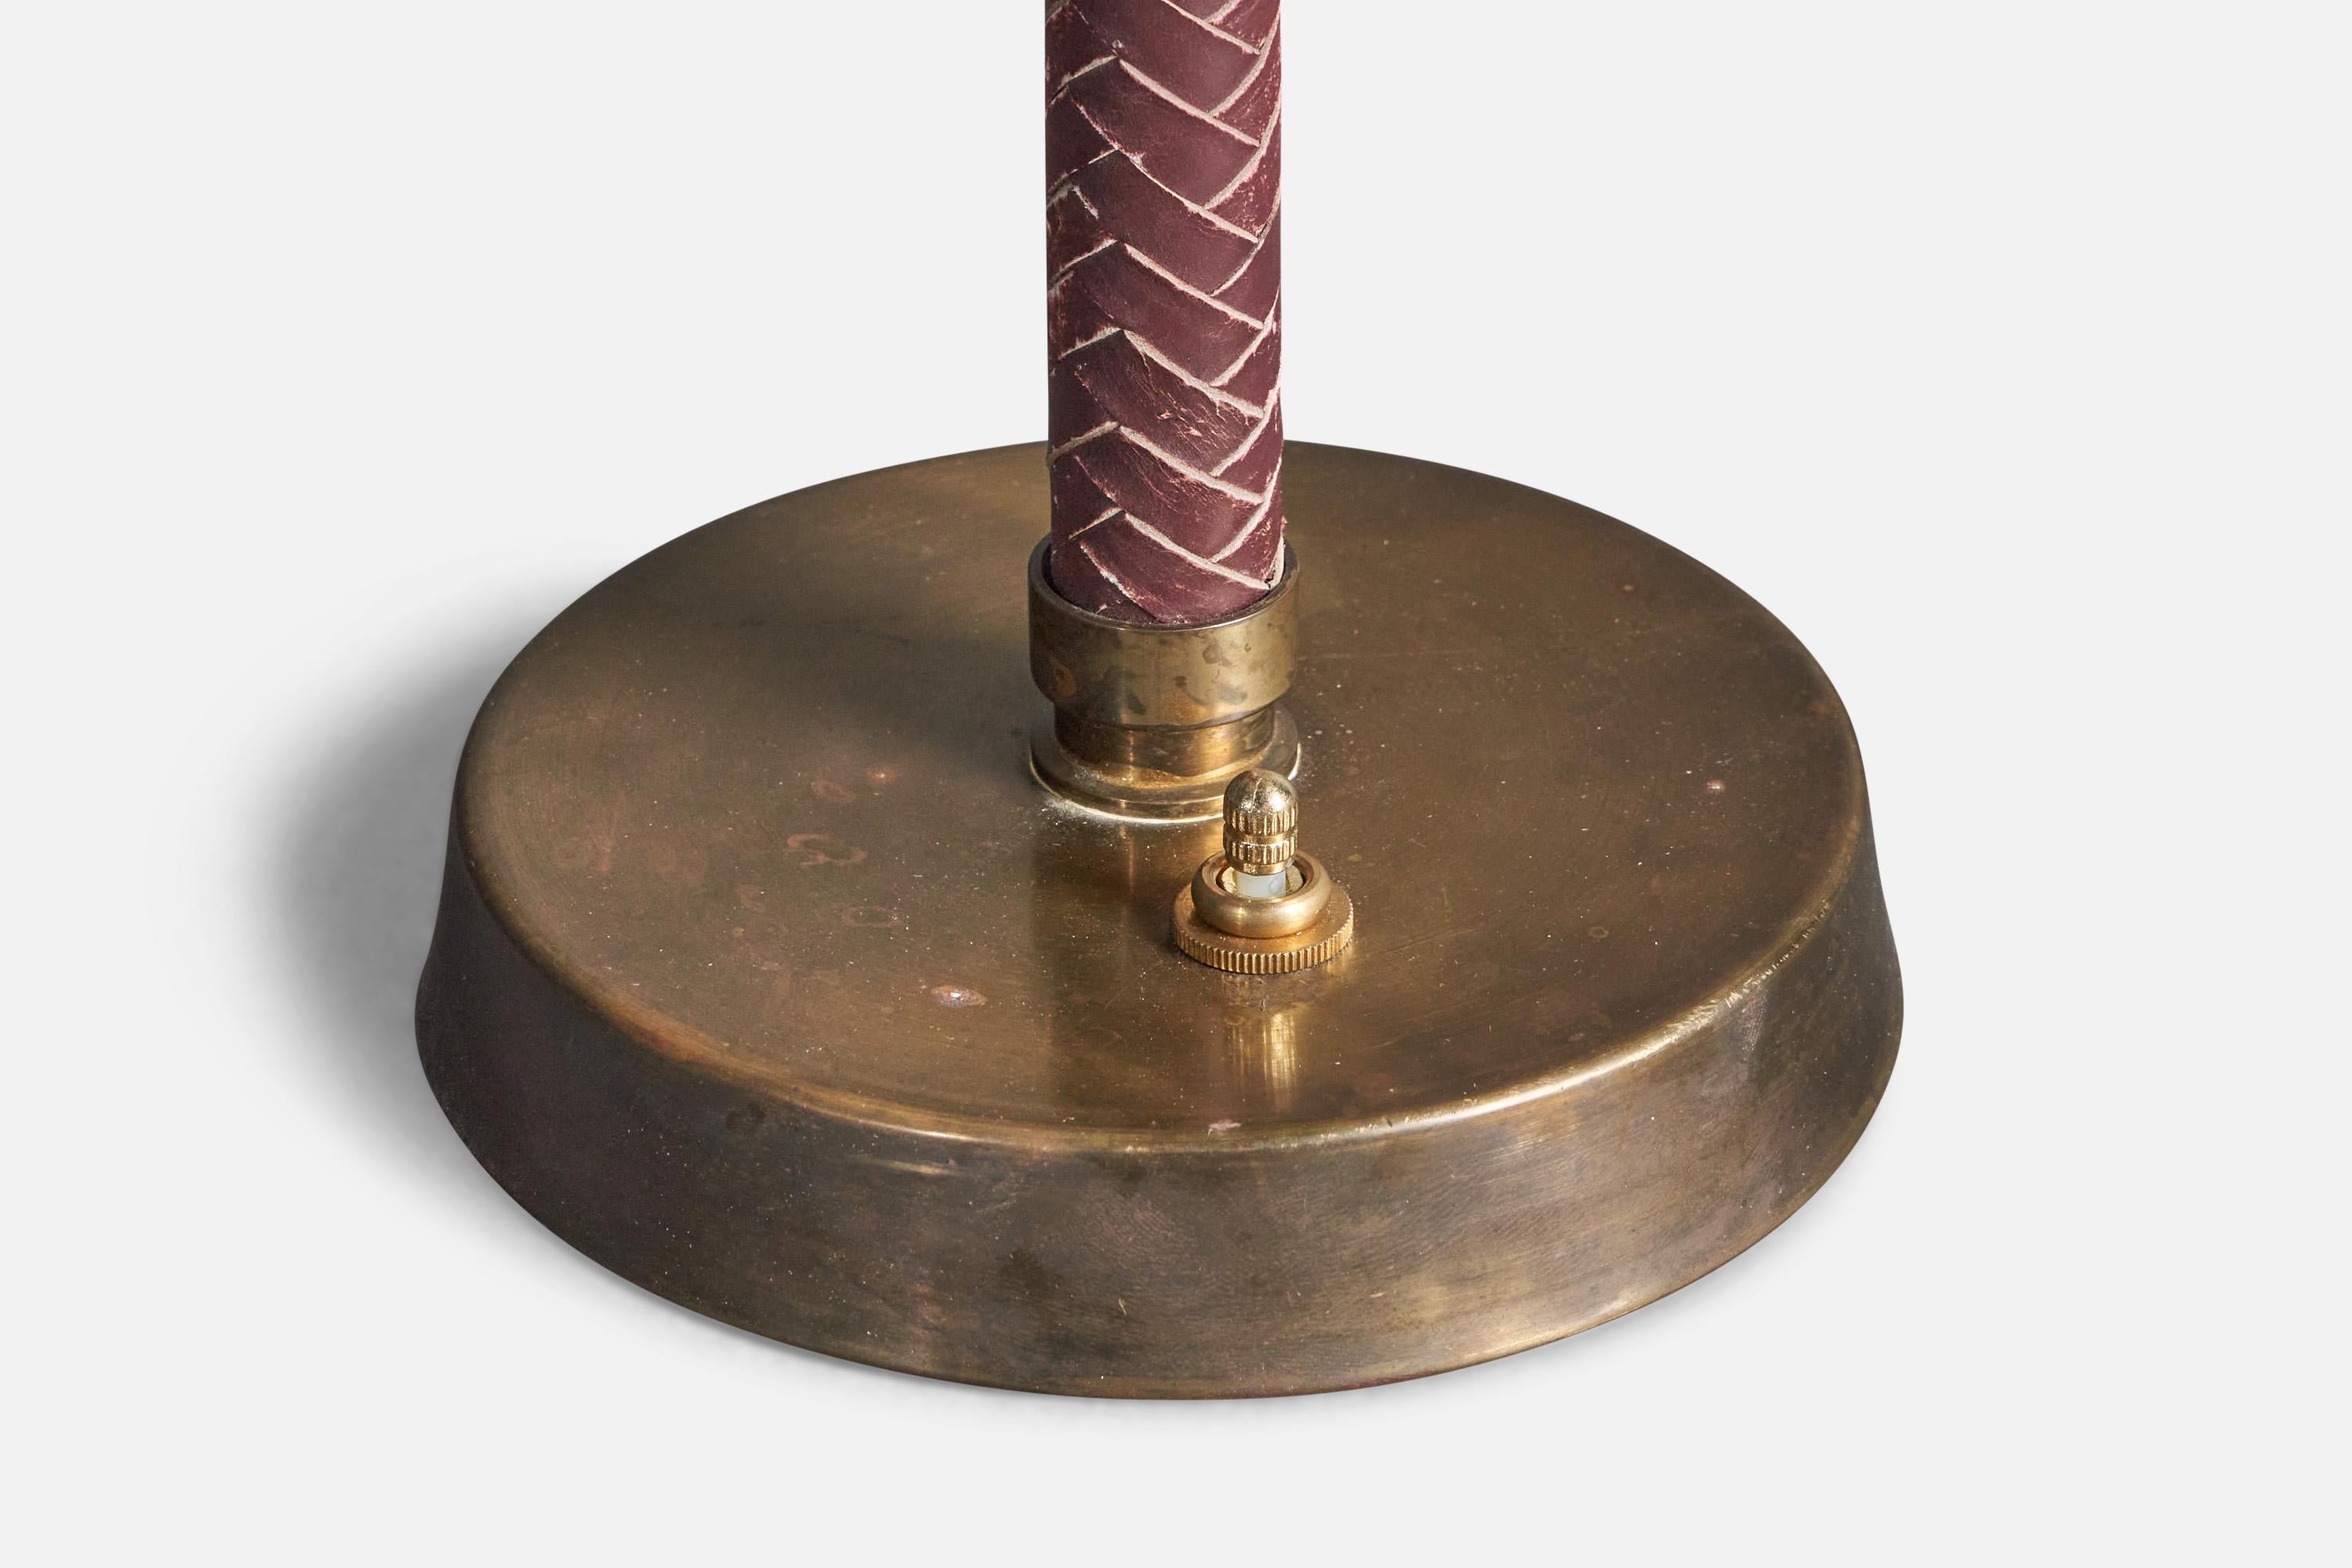 A table lamp. Designed and produced in Sweden, 1940s. Brass with finely braided and dyed leather.

Condition: Good 
Wear consistent with age and use. Original patina consistent with age and use. Losses to leather dye as illustrated.

Dimensions of